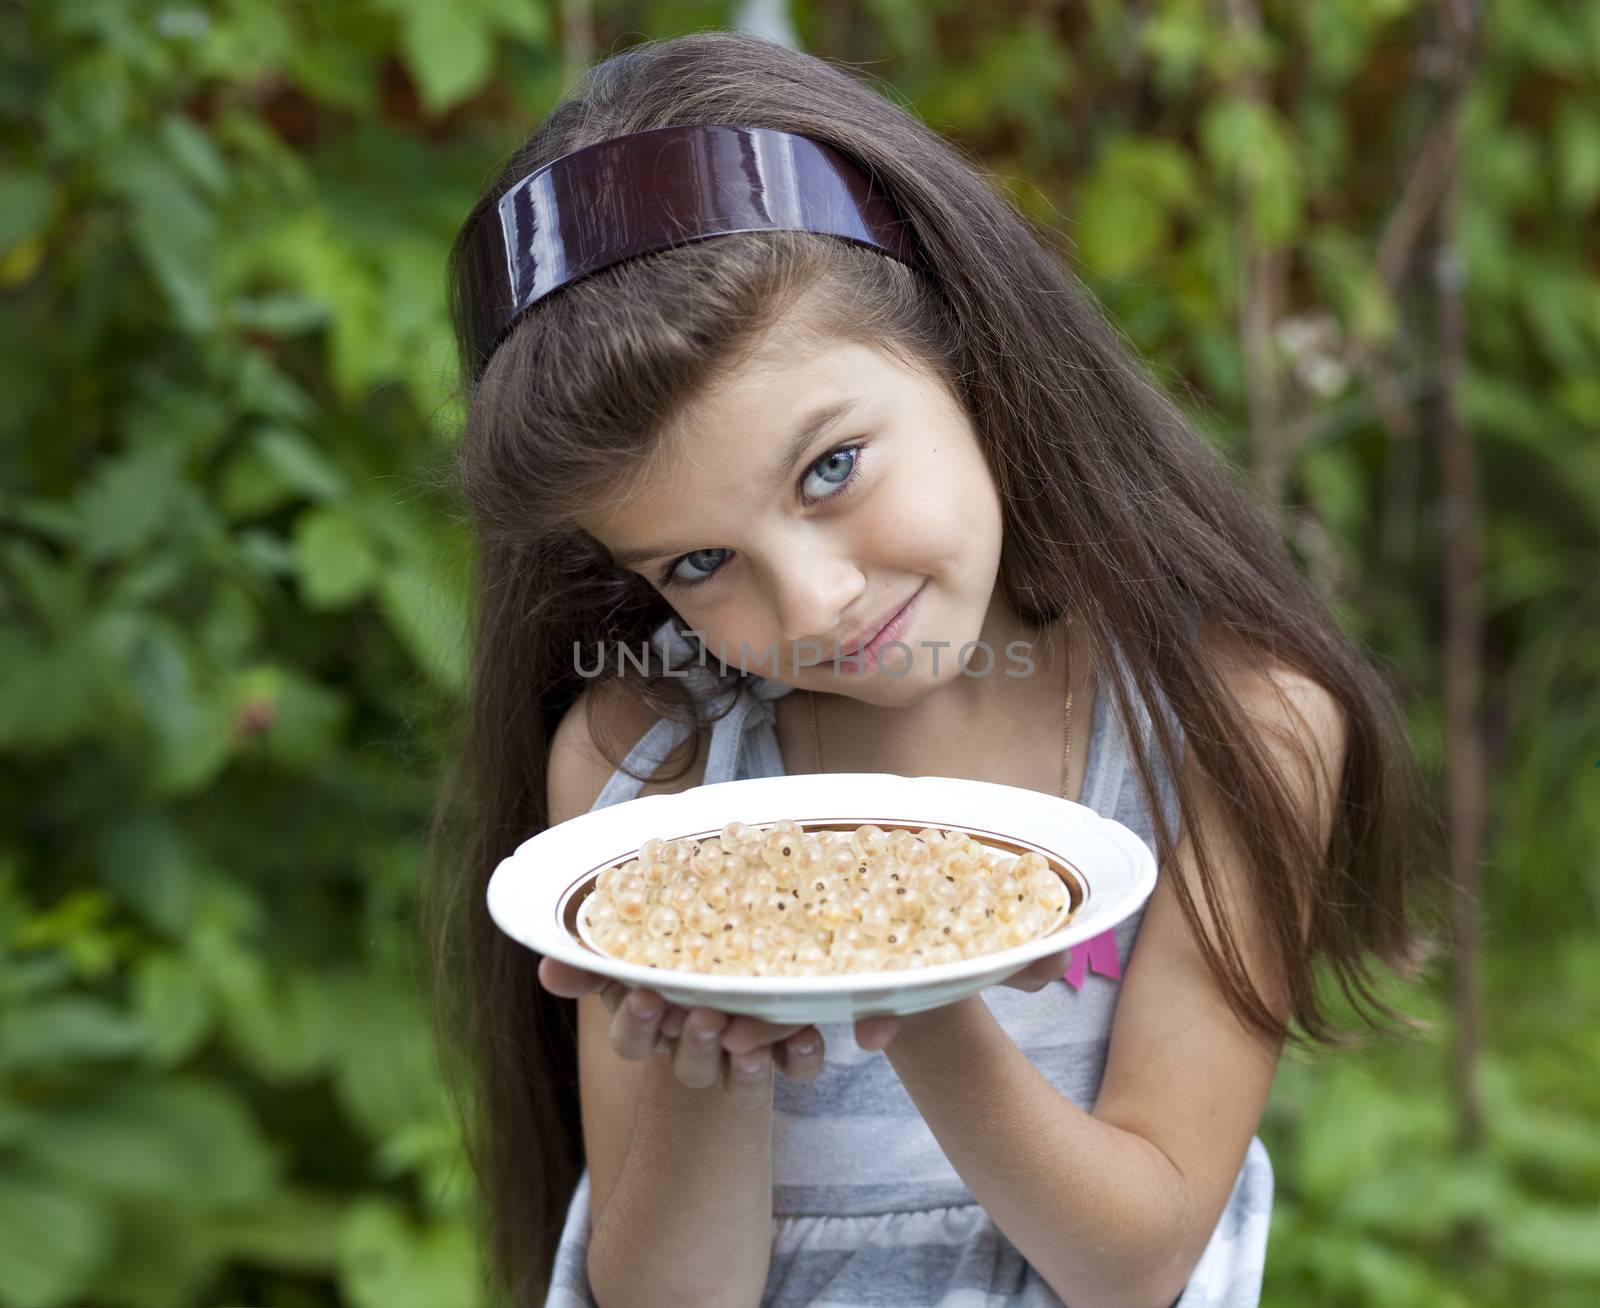 Little girl holding a plate with a white currants